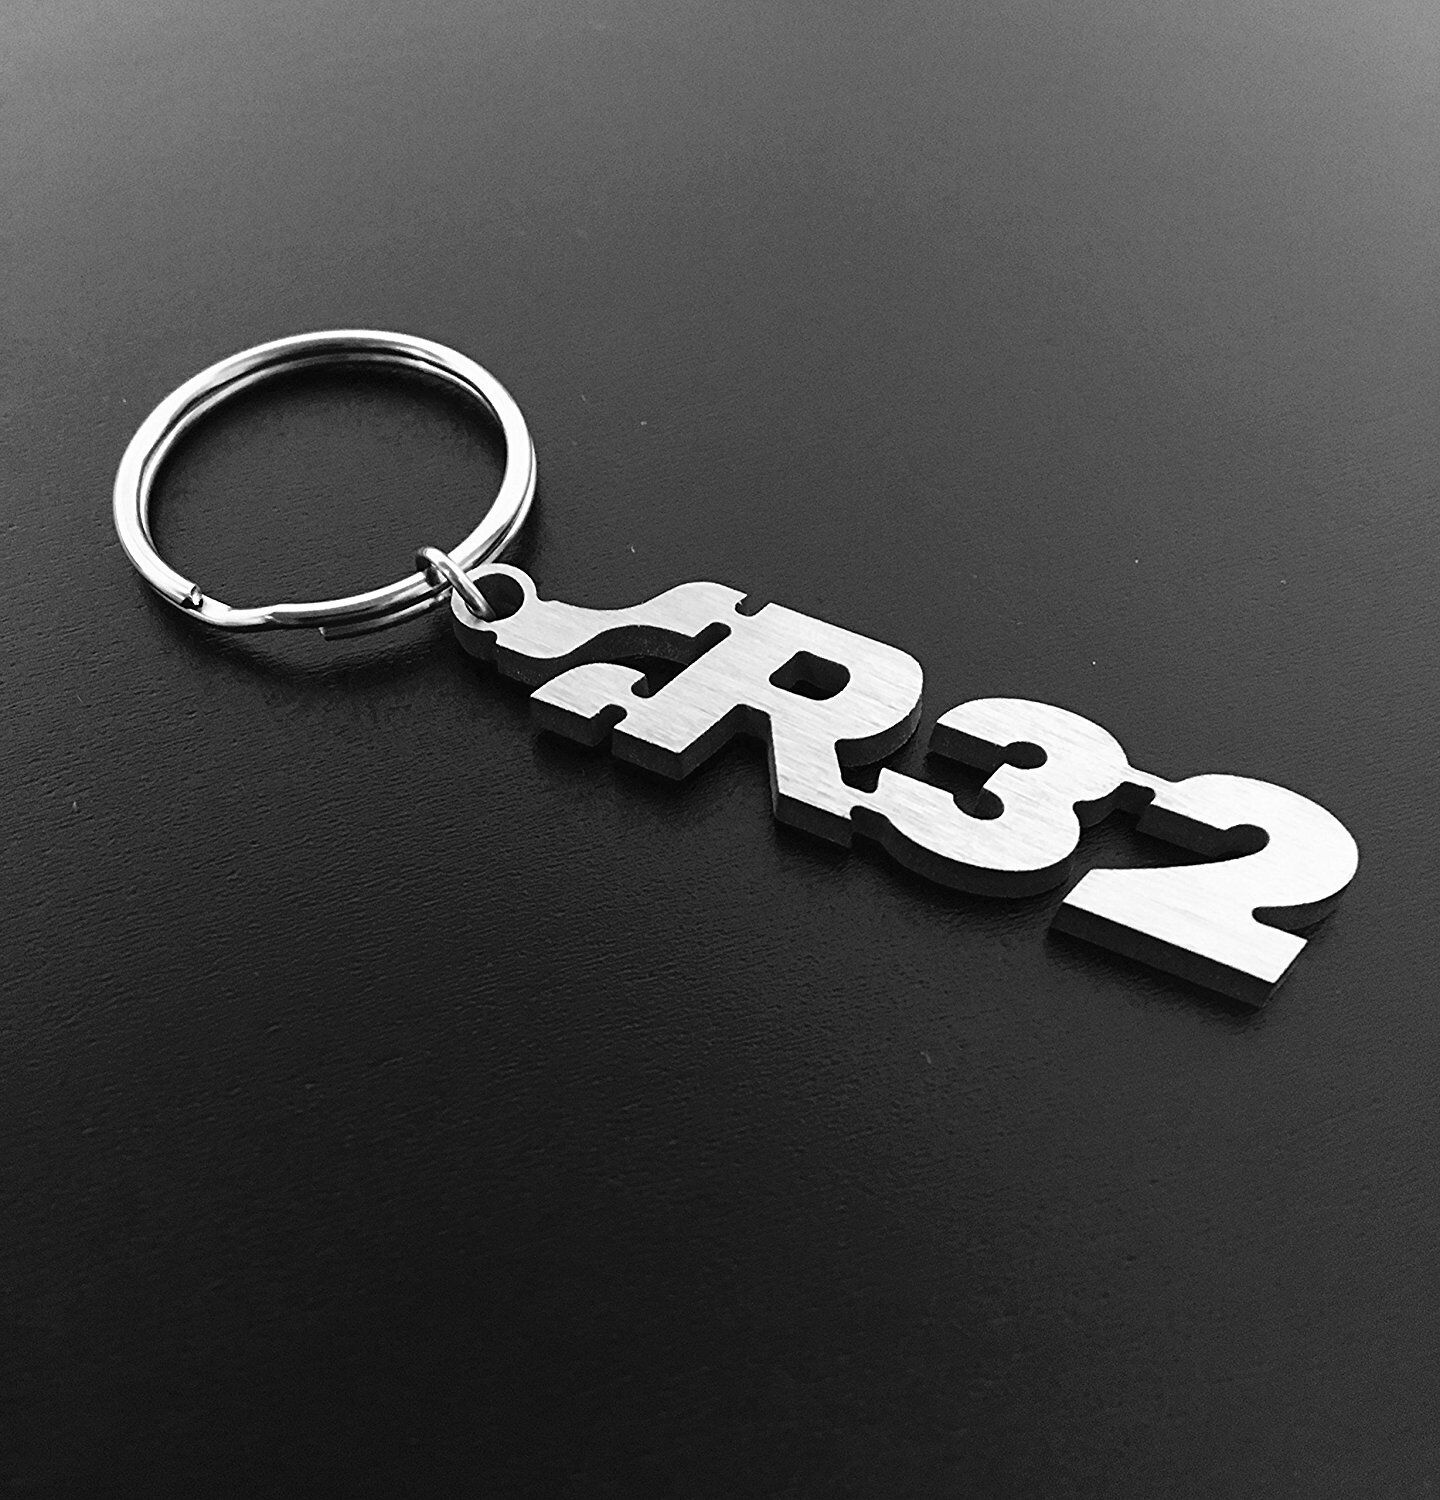 R32 Key Chain, Stainless steel FOR ALL VW